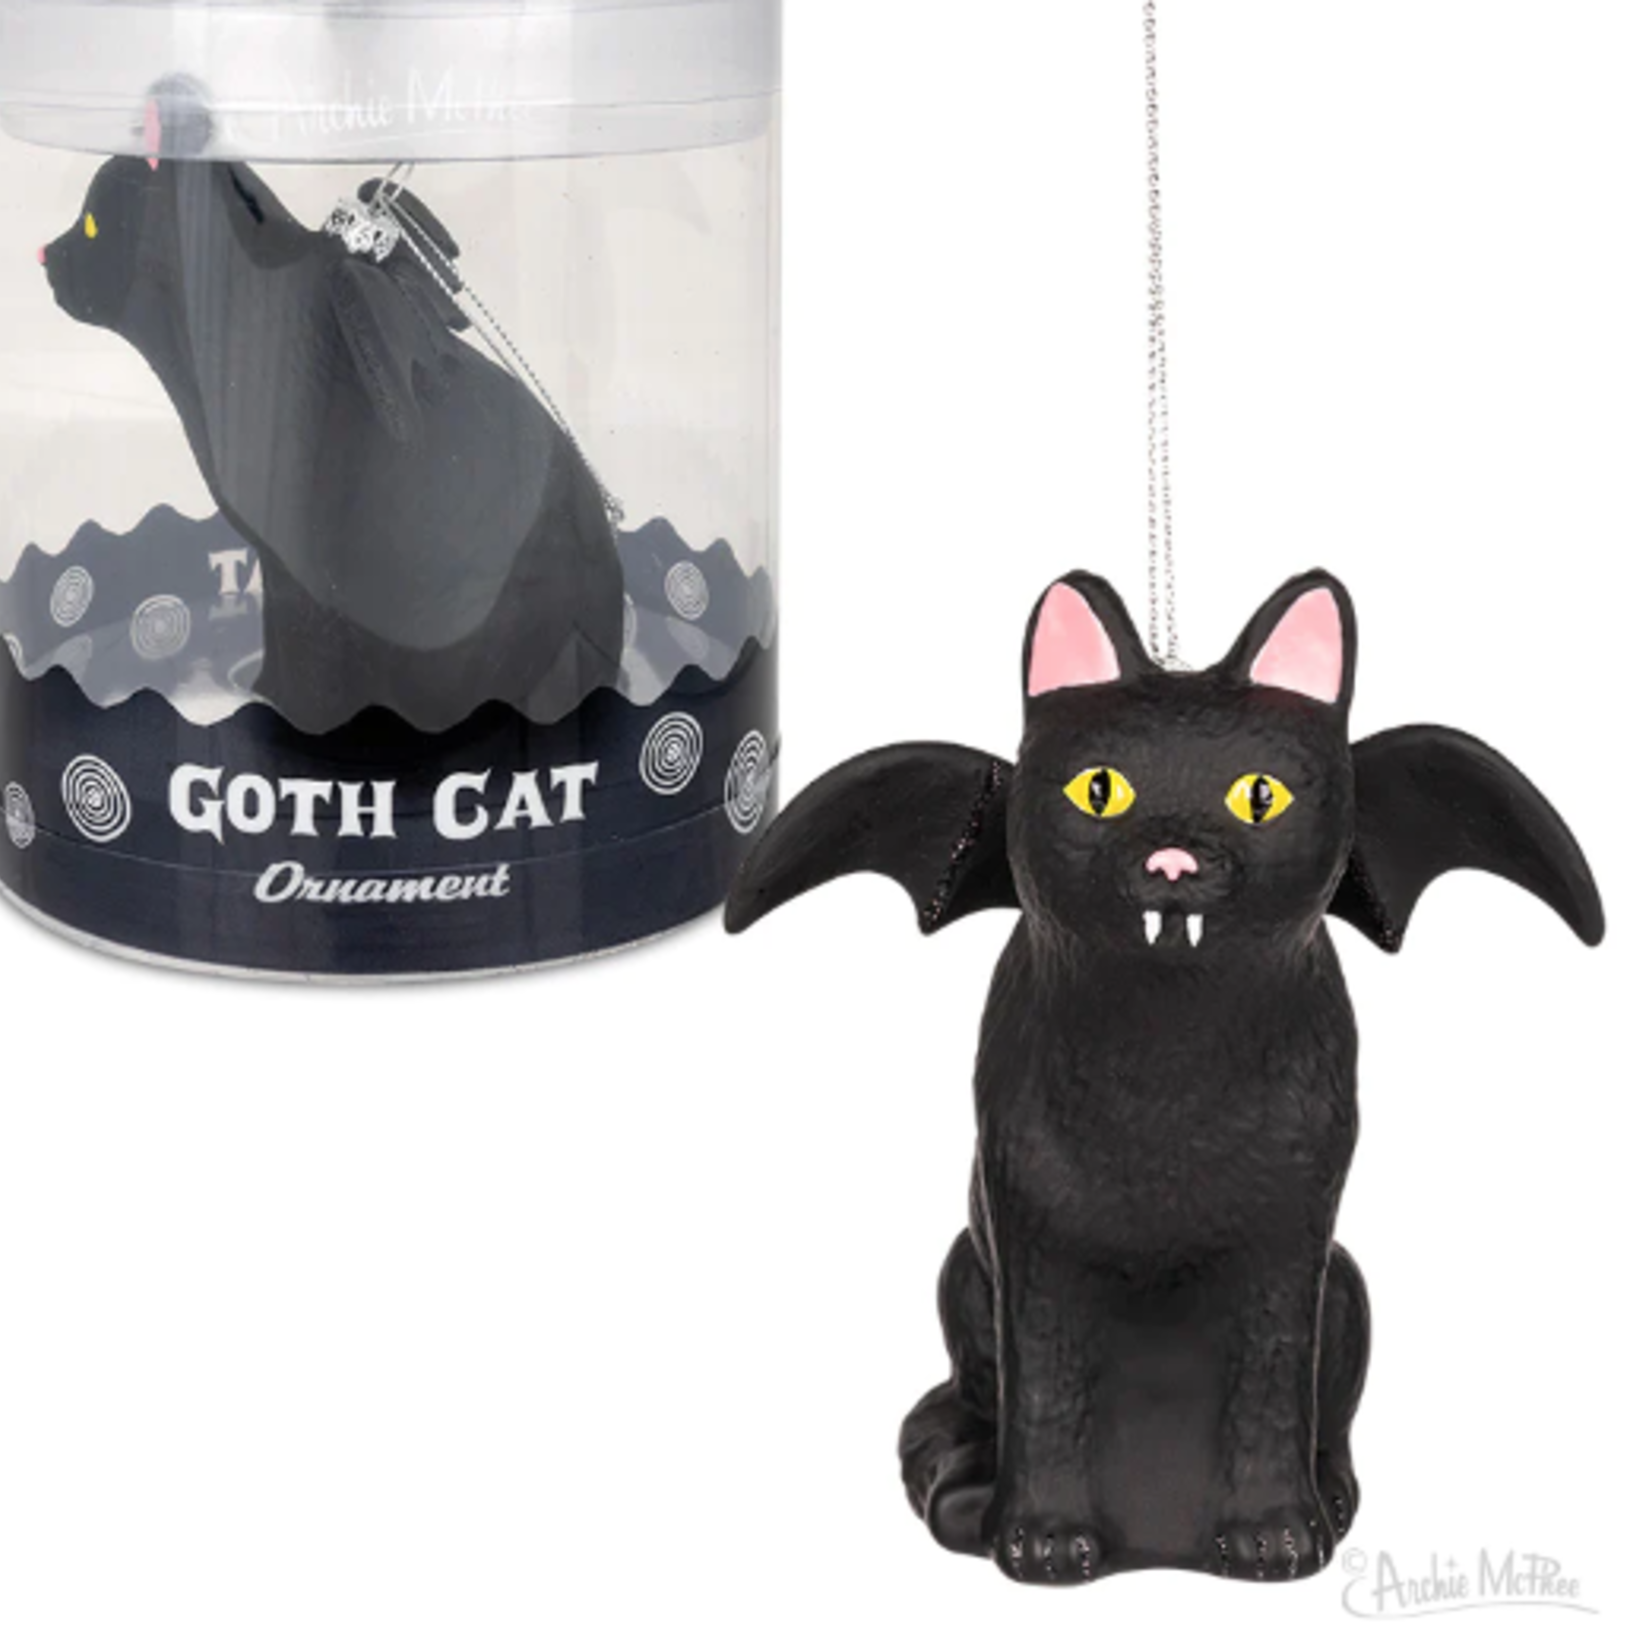 Accoutrements/Archie McPhee Goth Cat Ornament